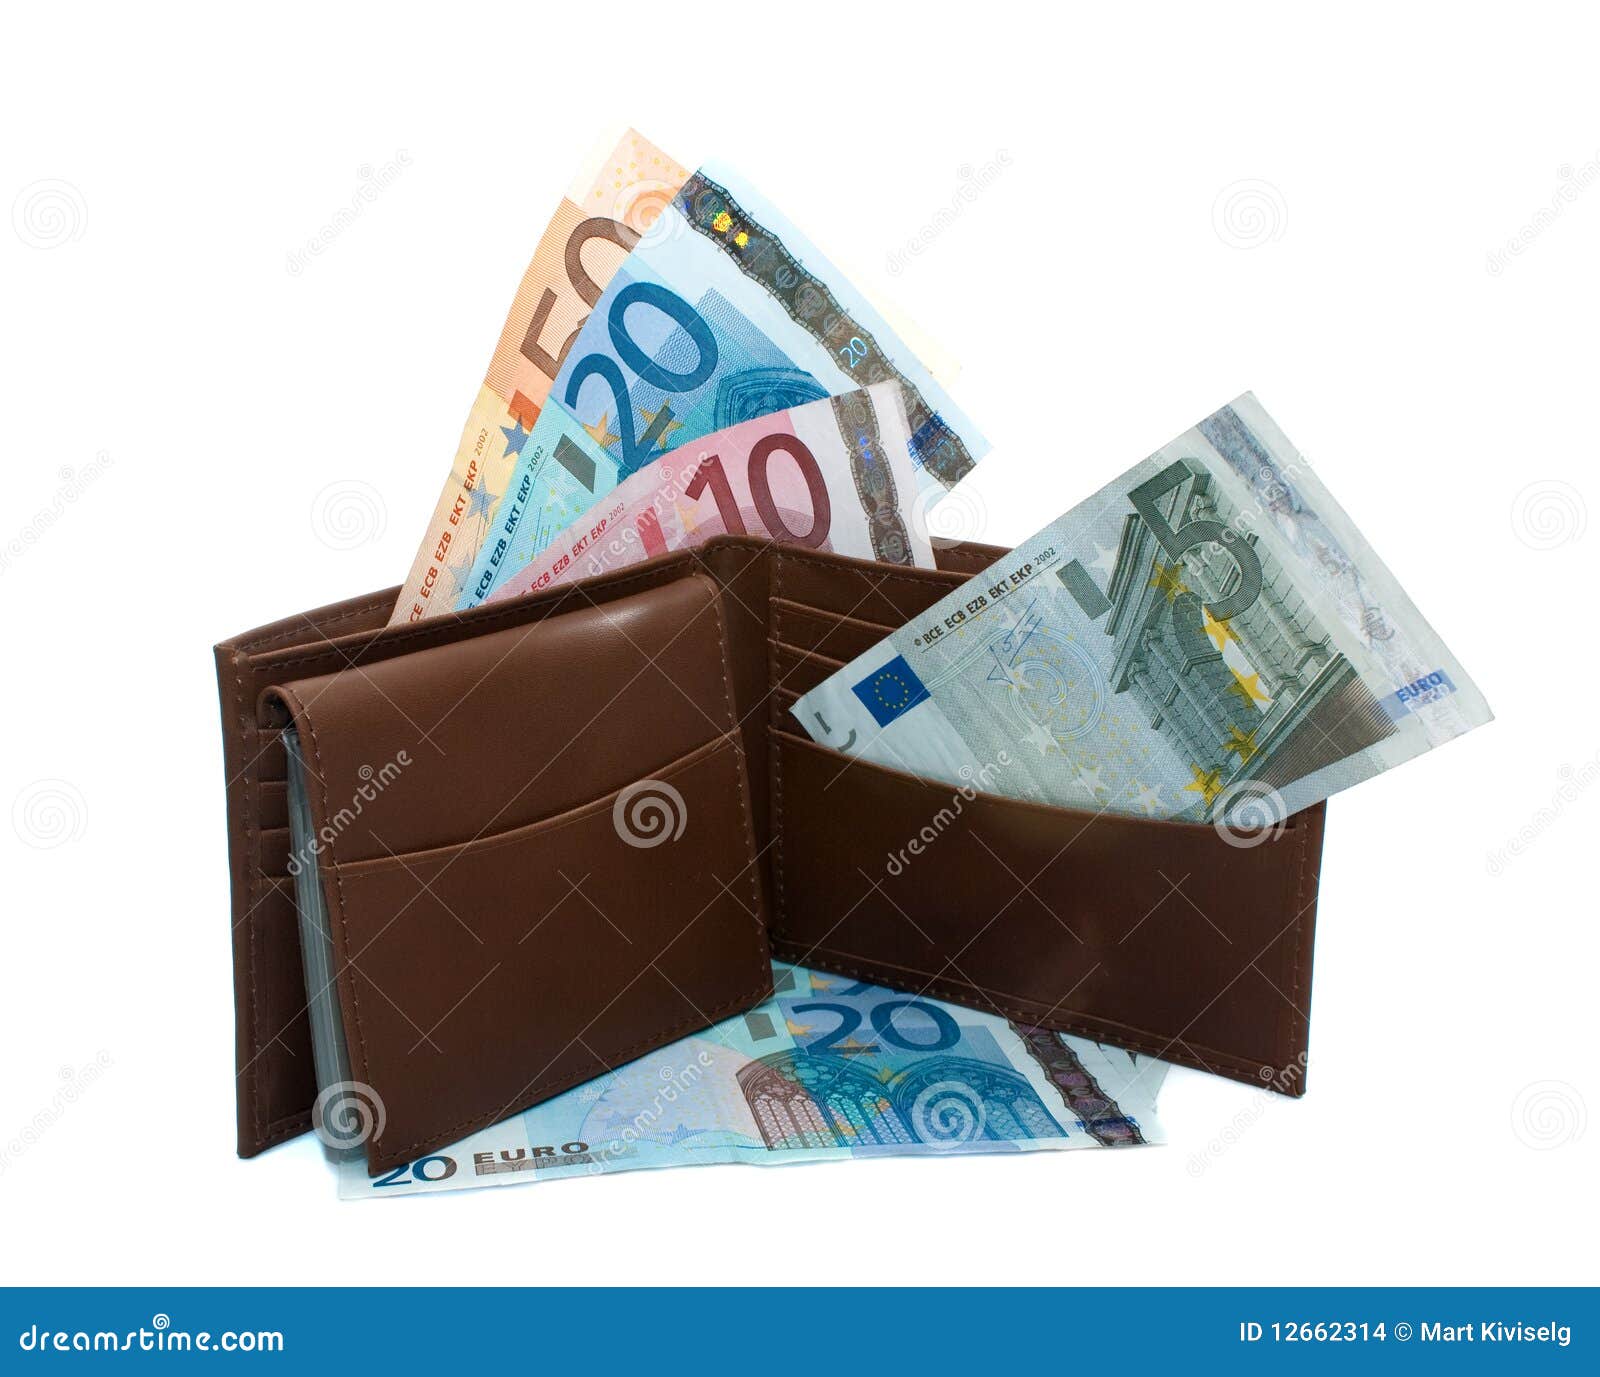 Wallet Full Of Euro Money Stock Images - Image: 12662314